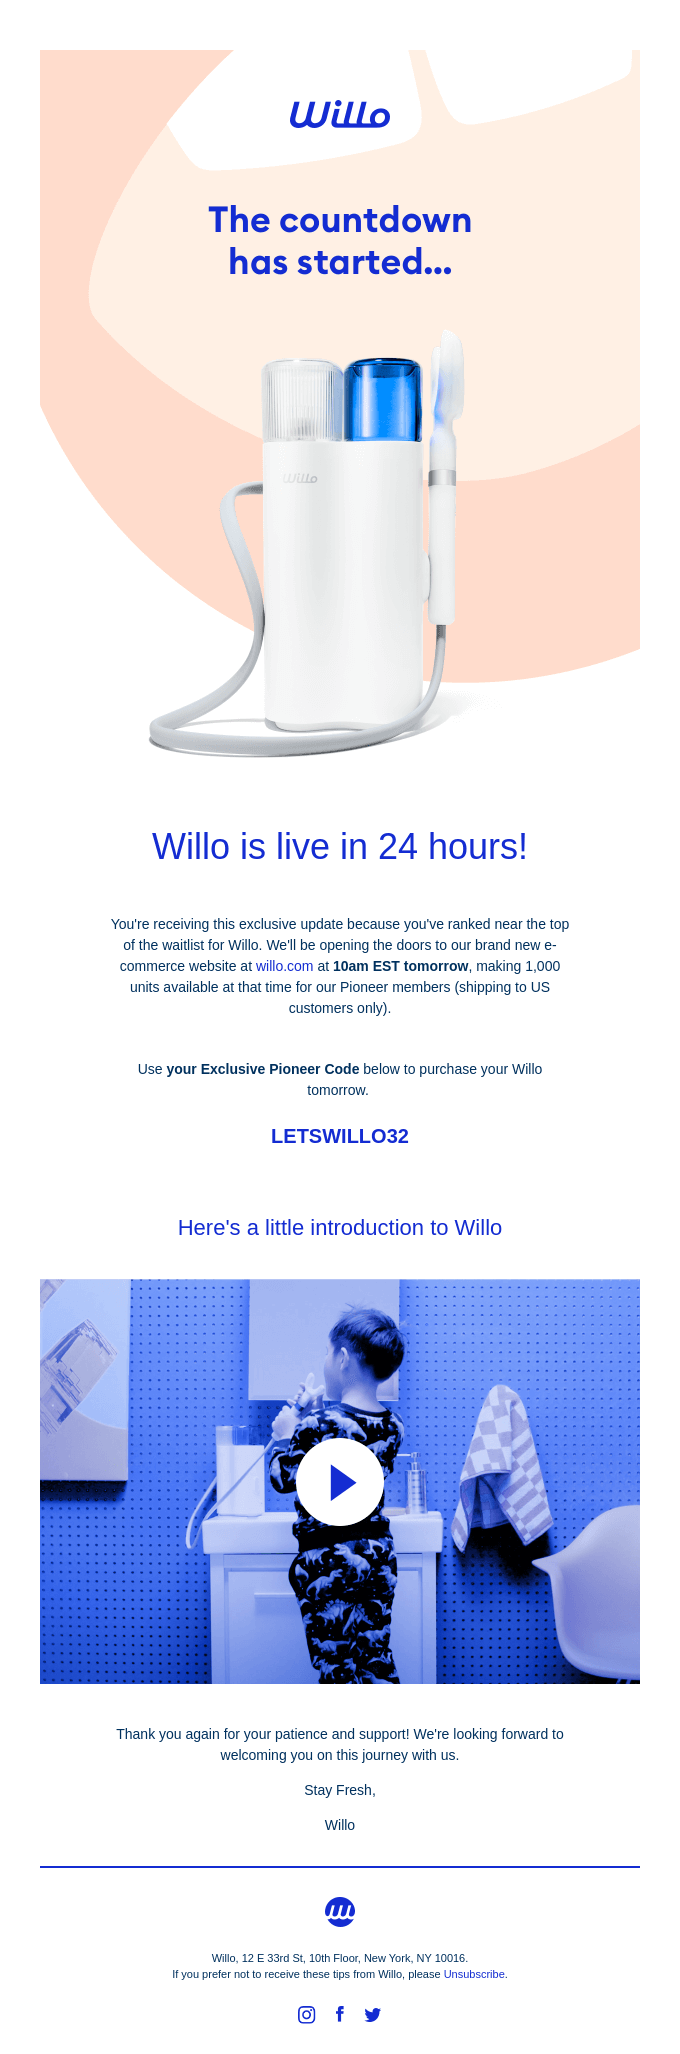 Your exclusive invite | Willo is live in 24hrs